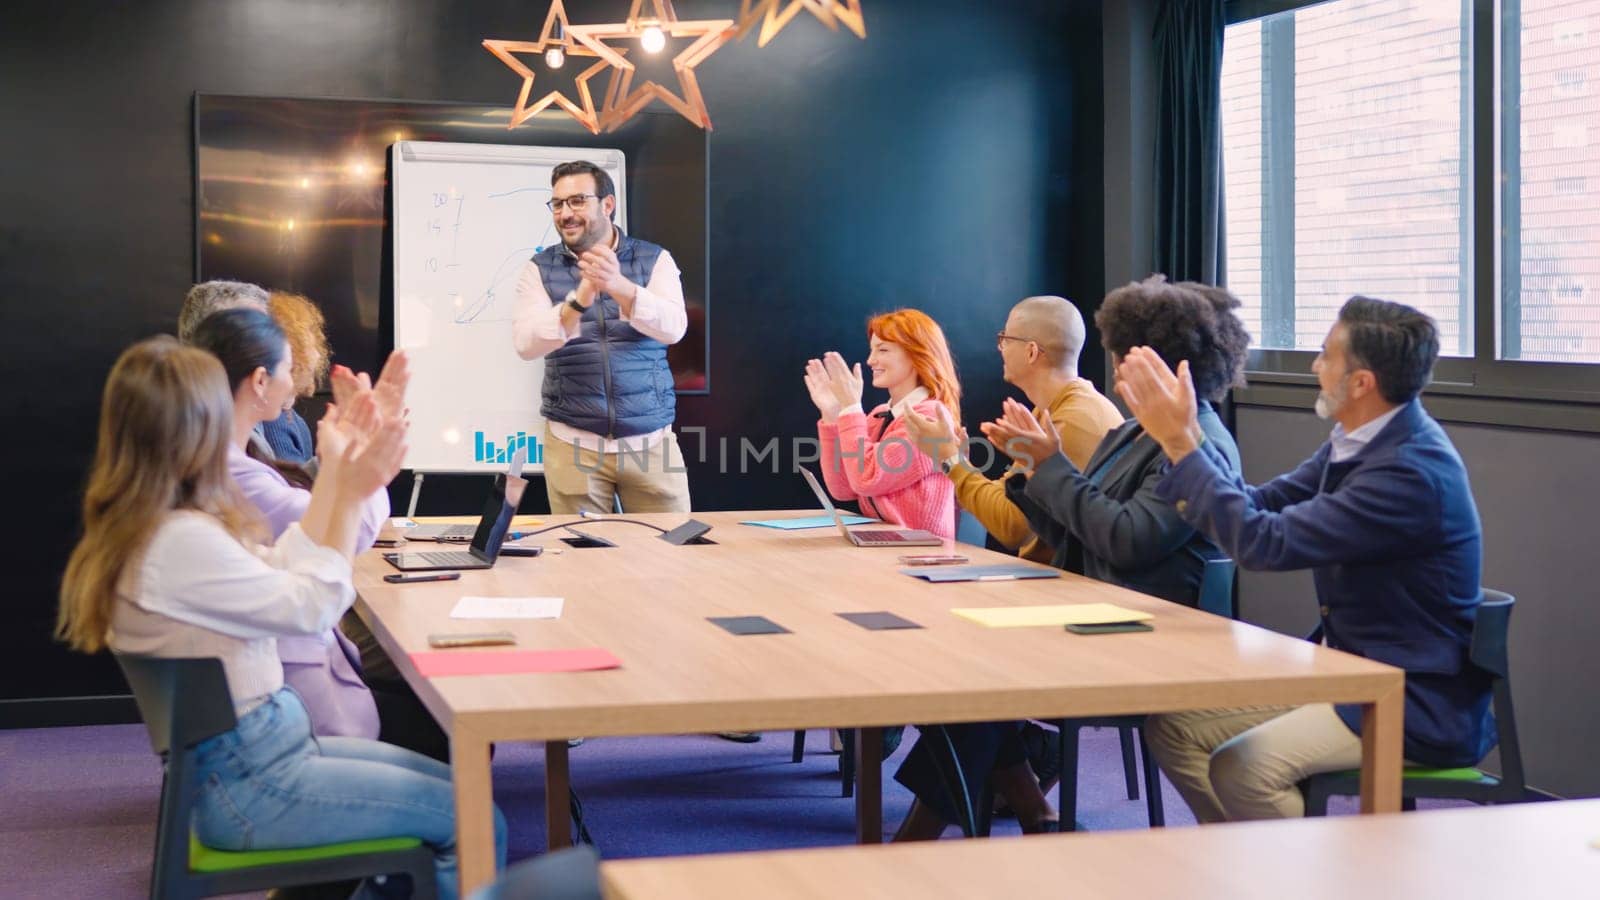 Group of multiracial coworkers congratulating a colleague applauding in a meeting room